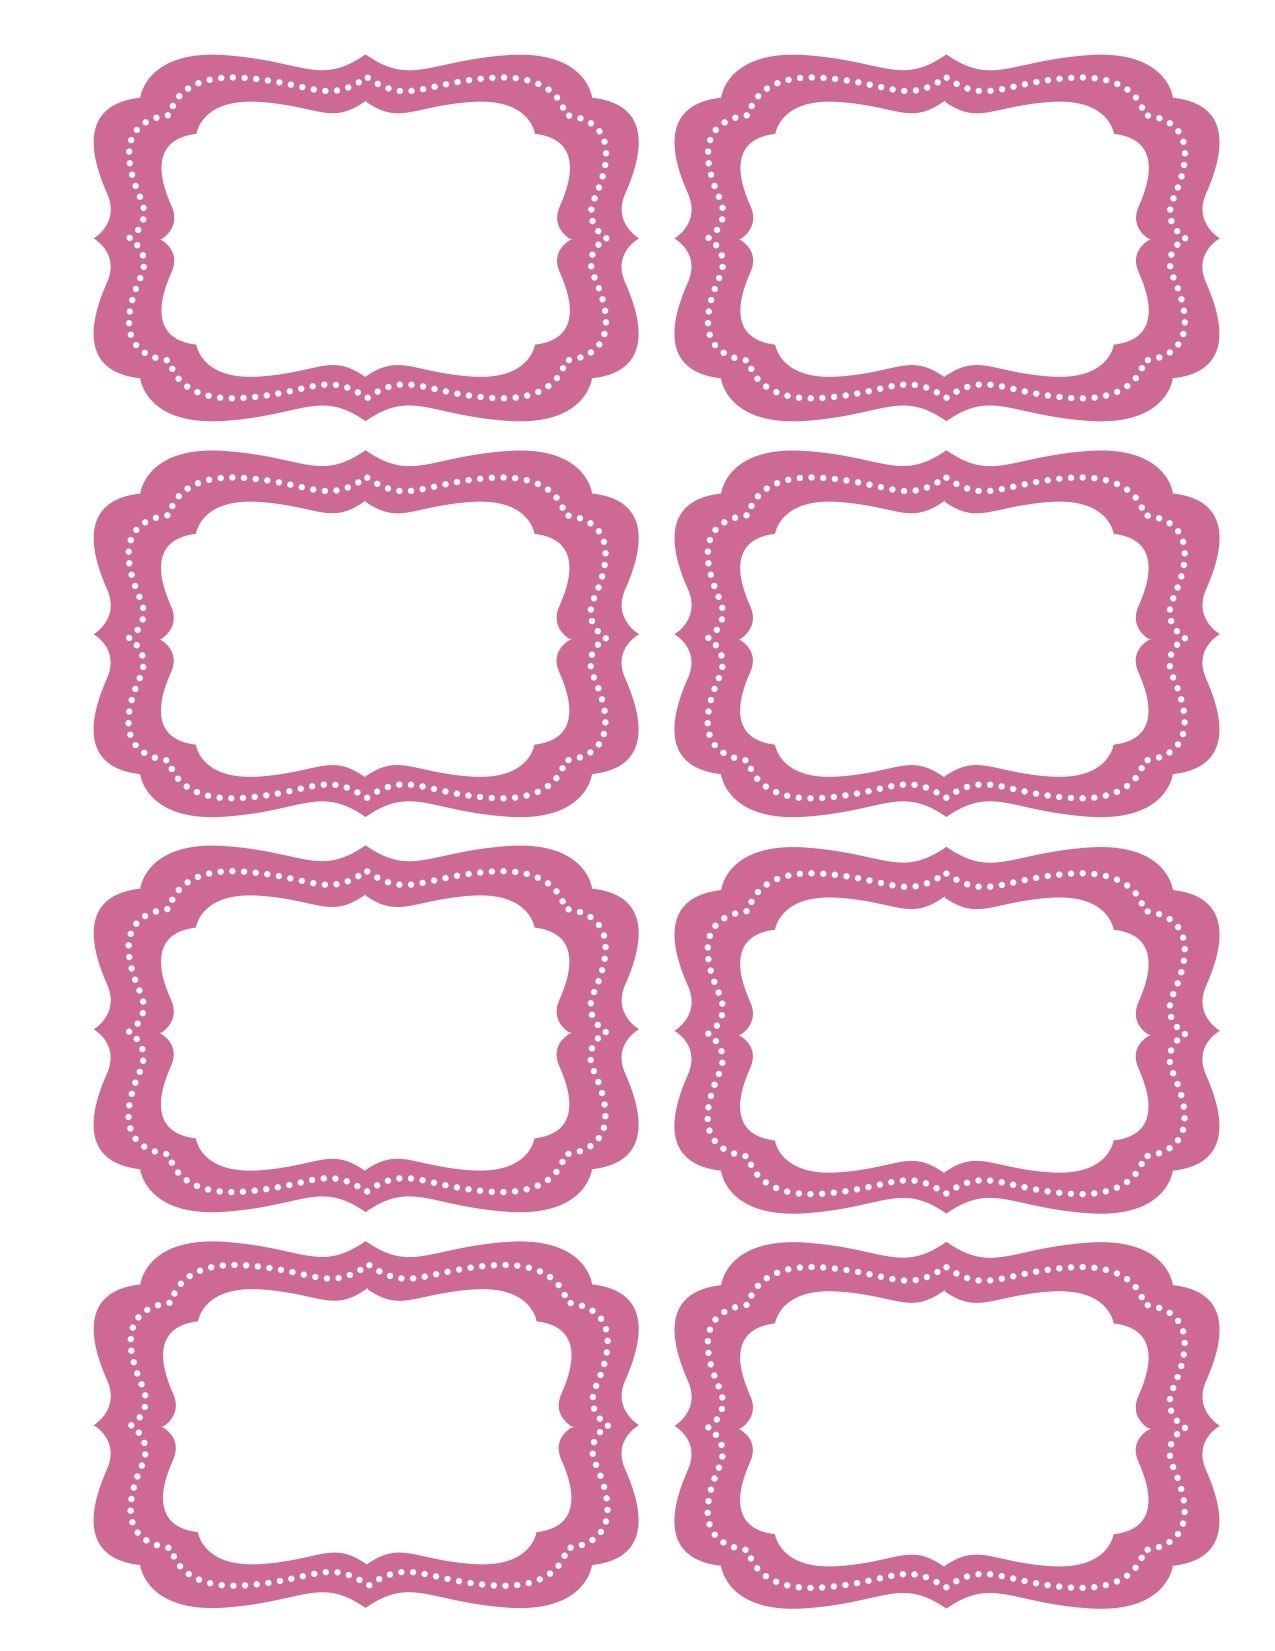 Free Printable Bag Label Templates | Candy Labels Blank Image - Free Printable Labels